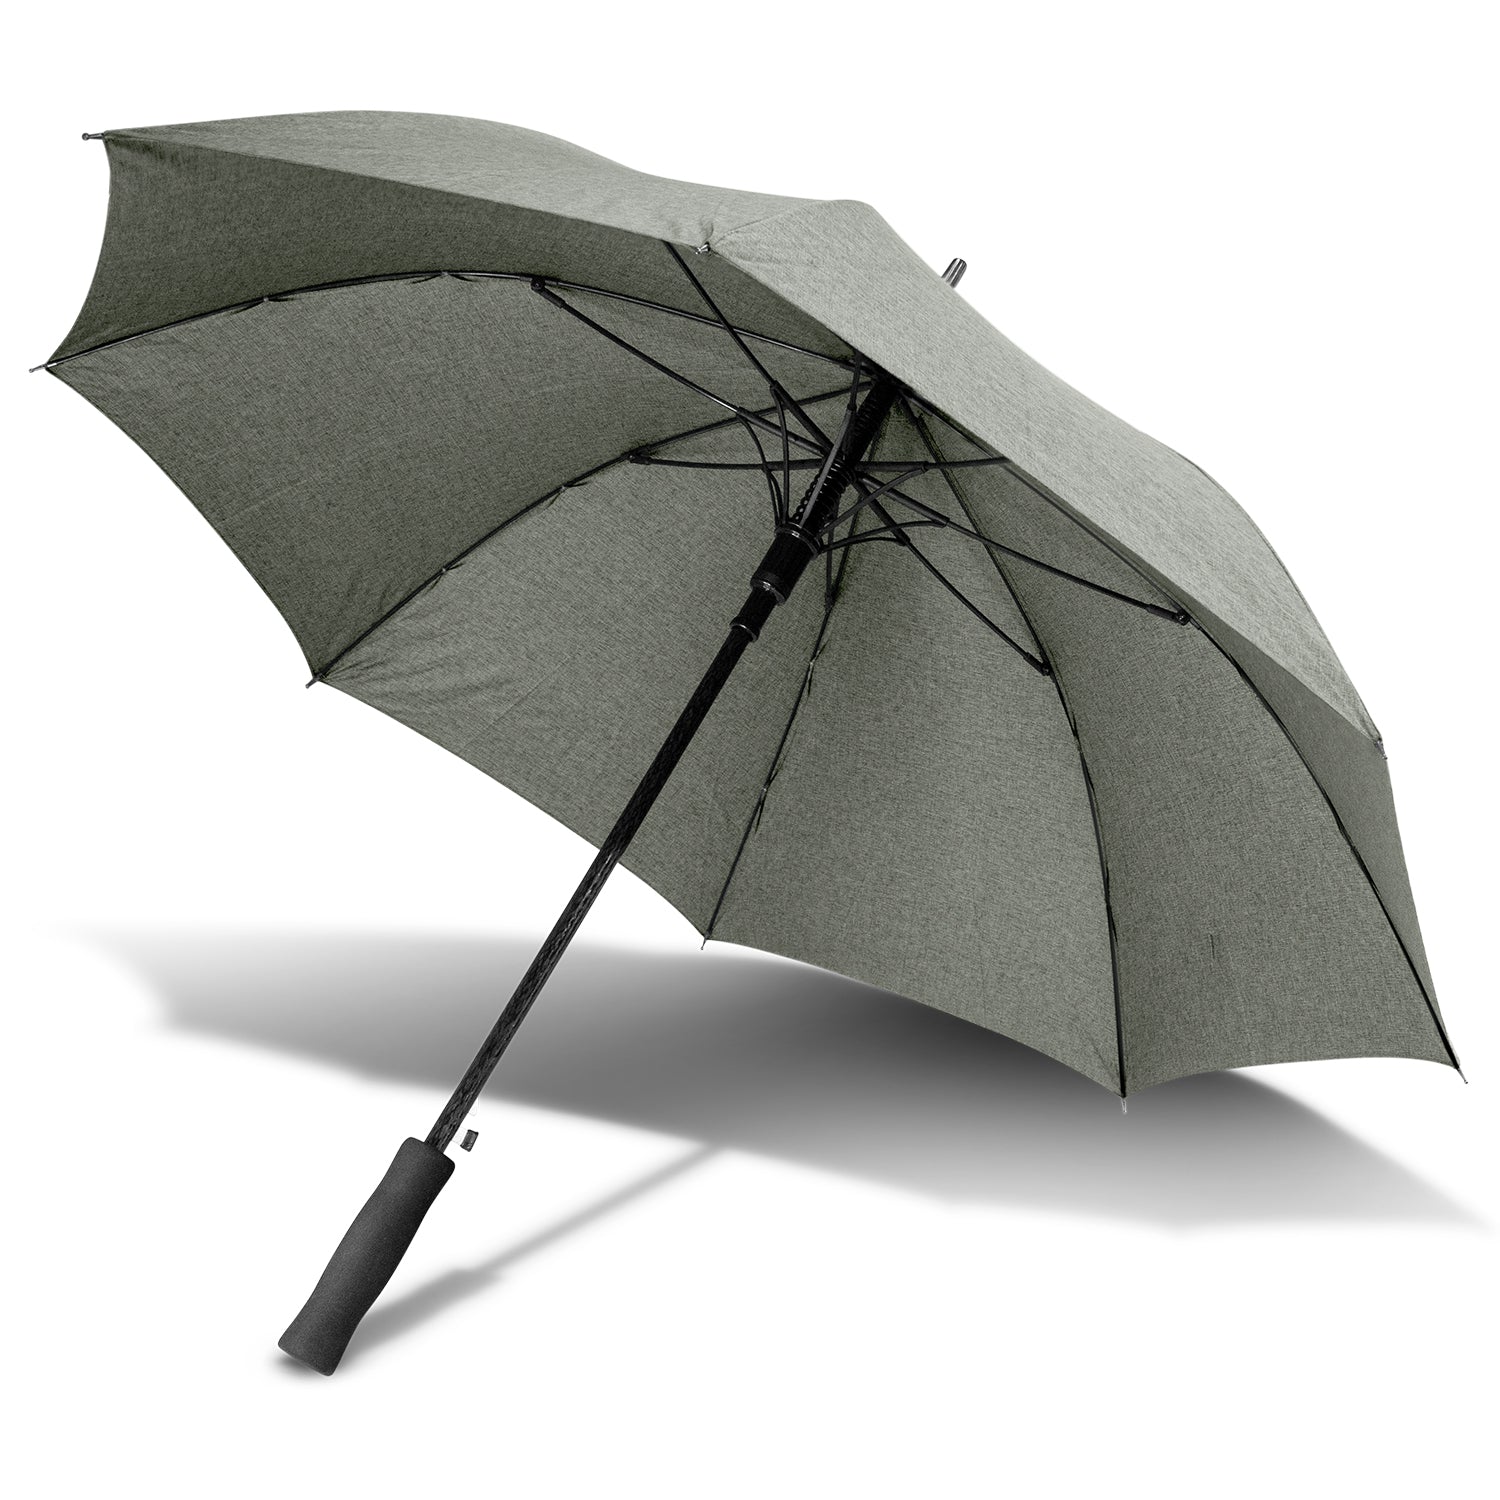 STORMPROOF ULTIMATE ELITE®️ Heavy Duty Personal Umbrella With Windproof Fibreglass Frame and Fibreglass Shaft - Premium Automatic Opening